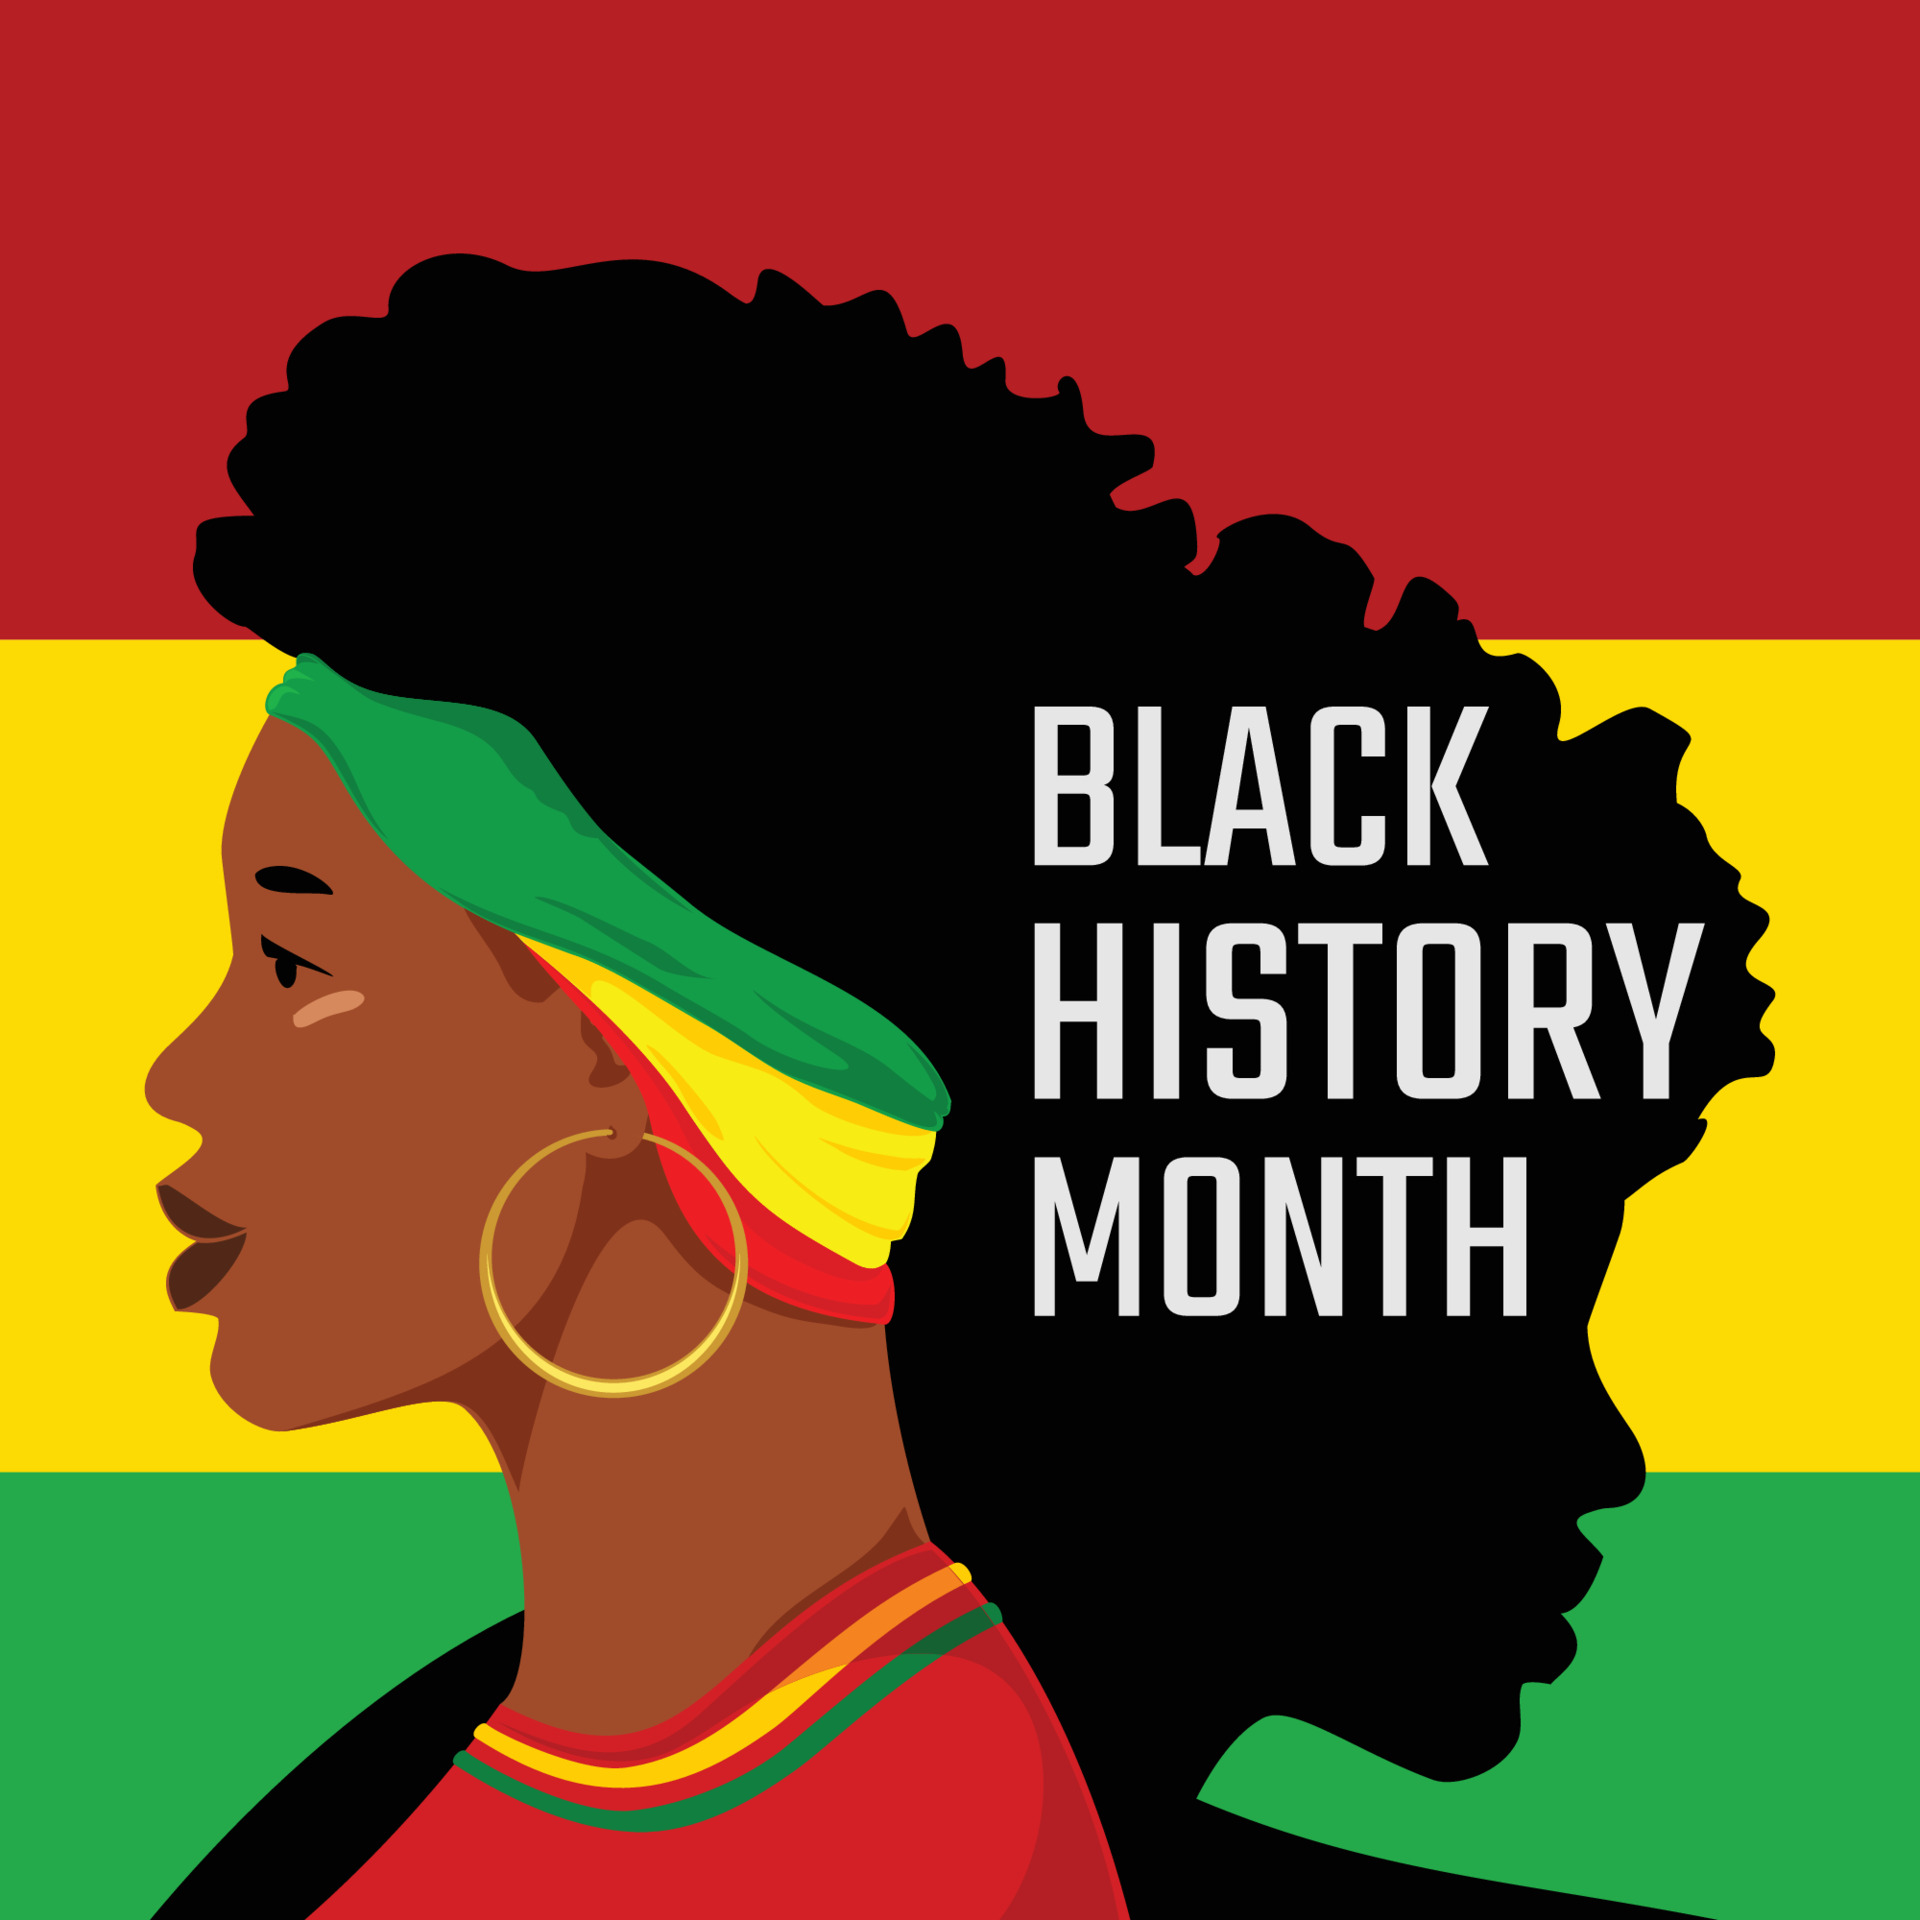 Thumbnail for the post titled: Black History Month Drop-In